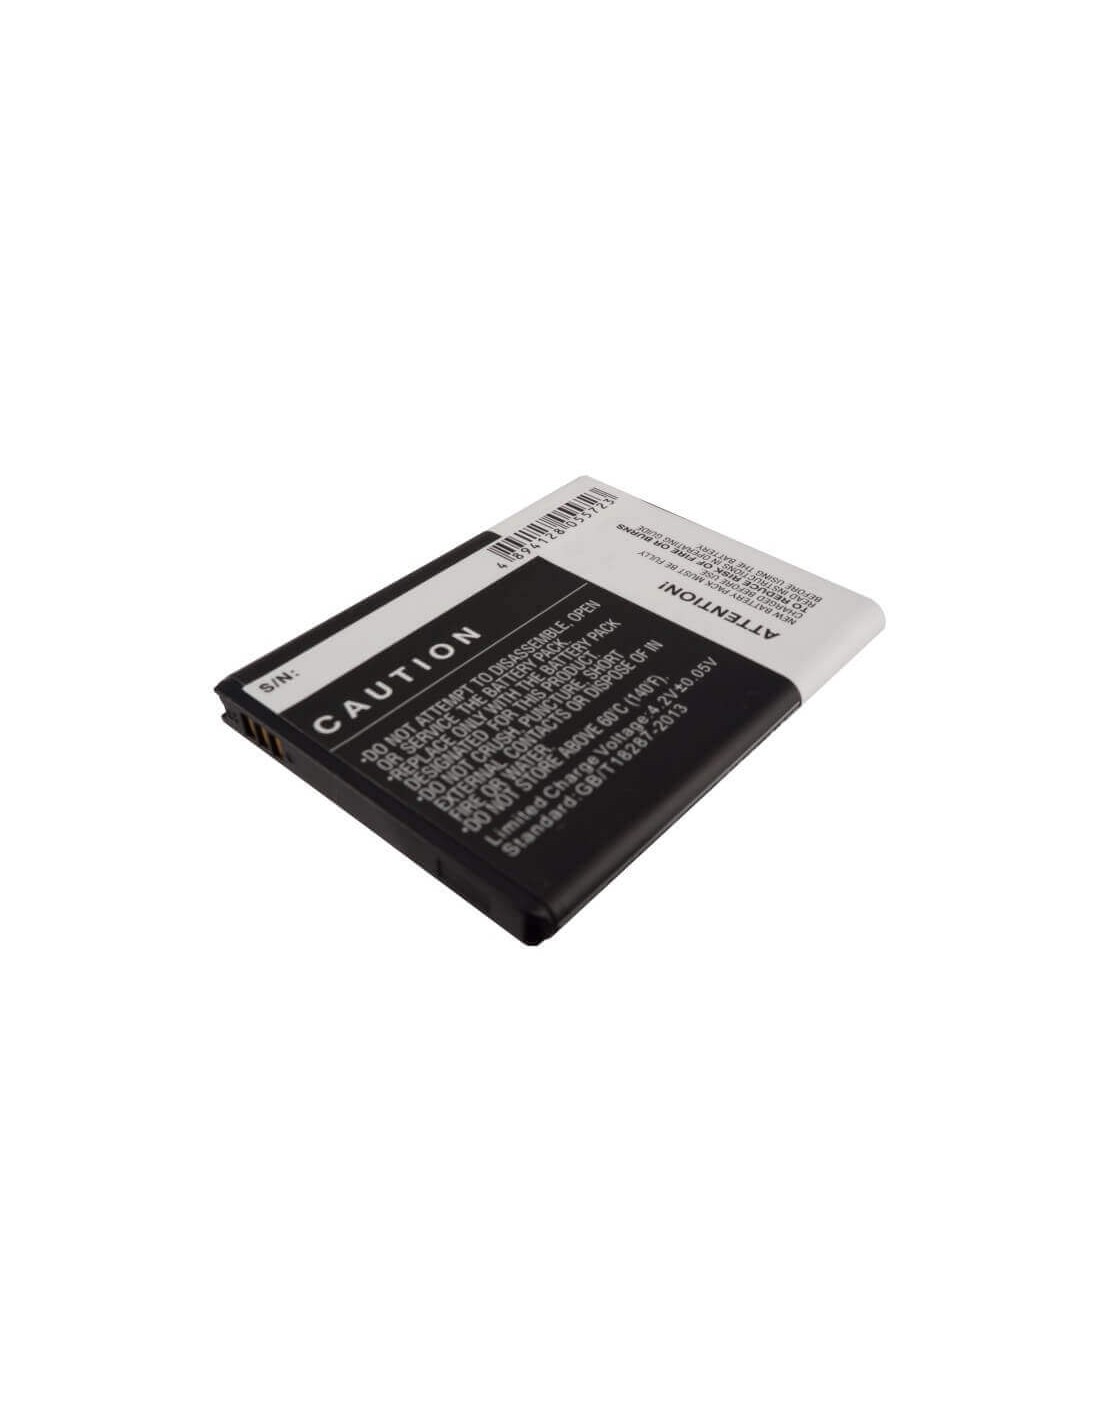 Battery for Samsung Galaxy Note, GT-N7000, GT-I9220 3.7V, 2500mAh - 9.25Wh